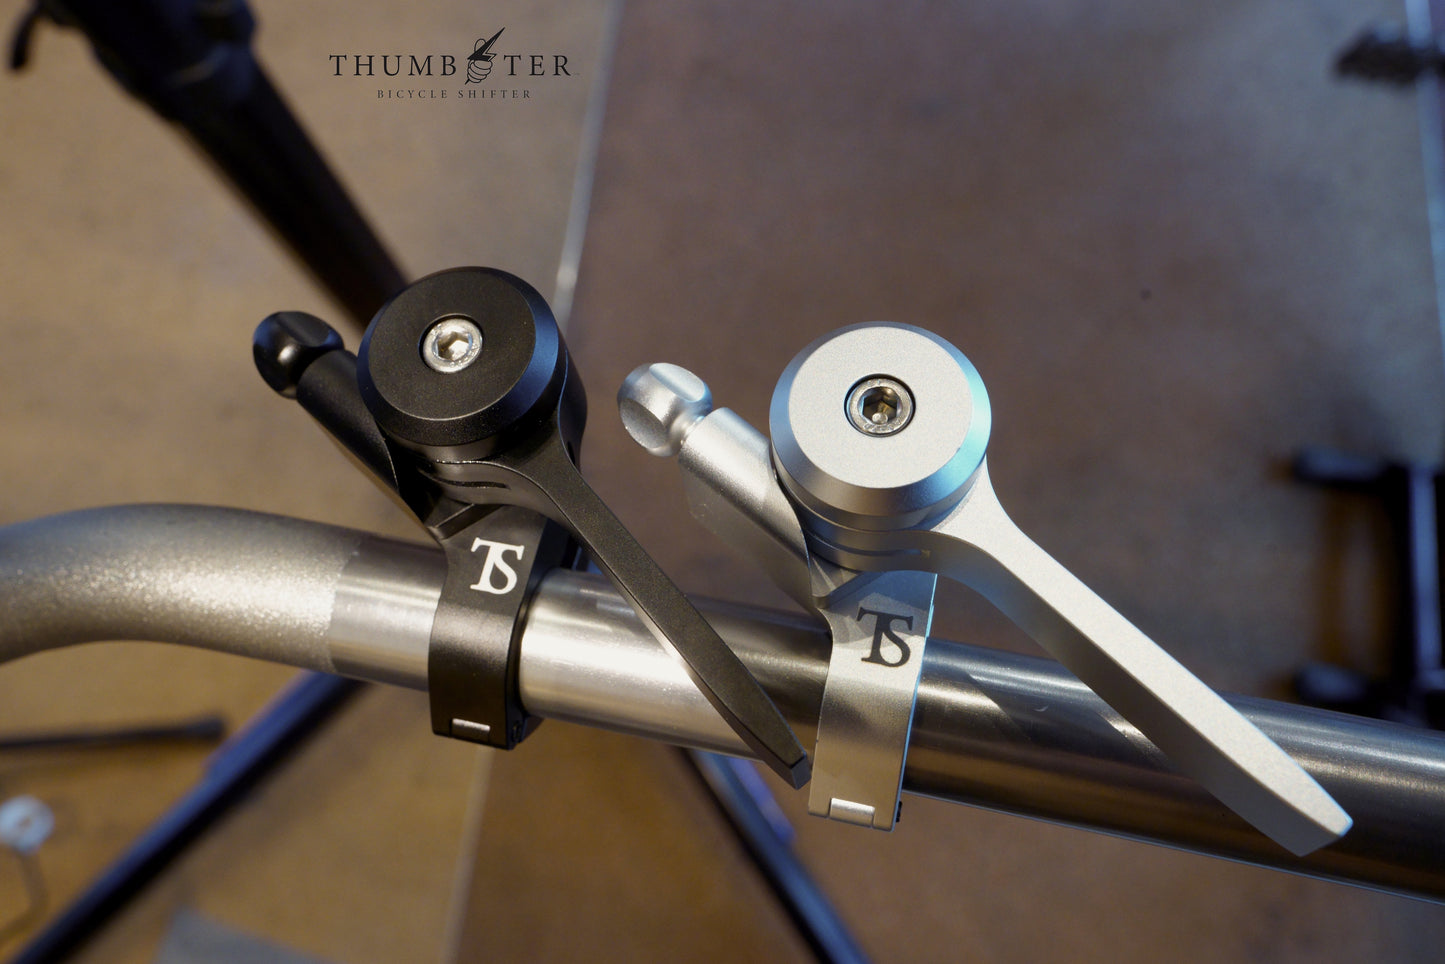 THUMBSTER BLACK or SILVER  2 units